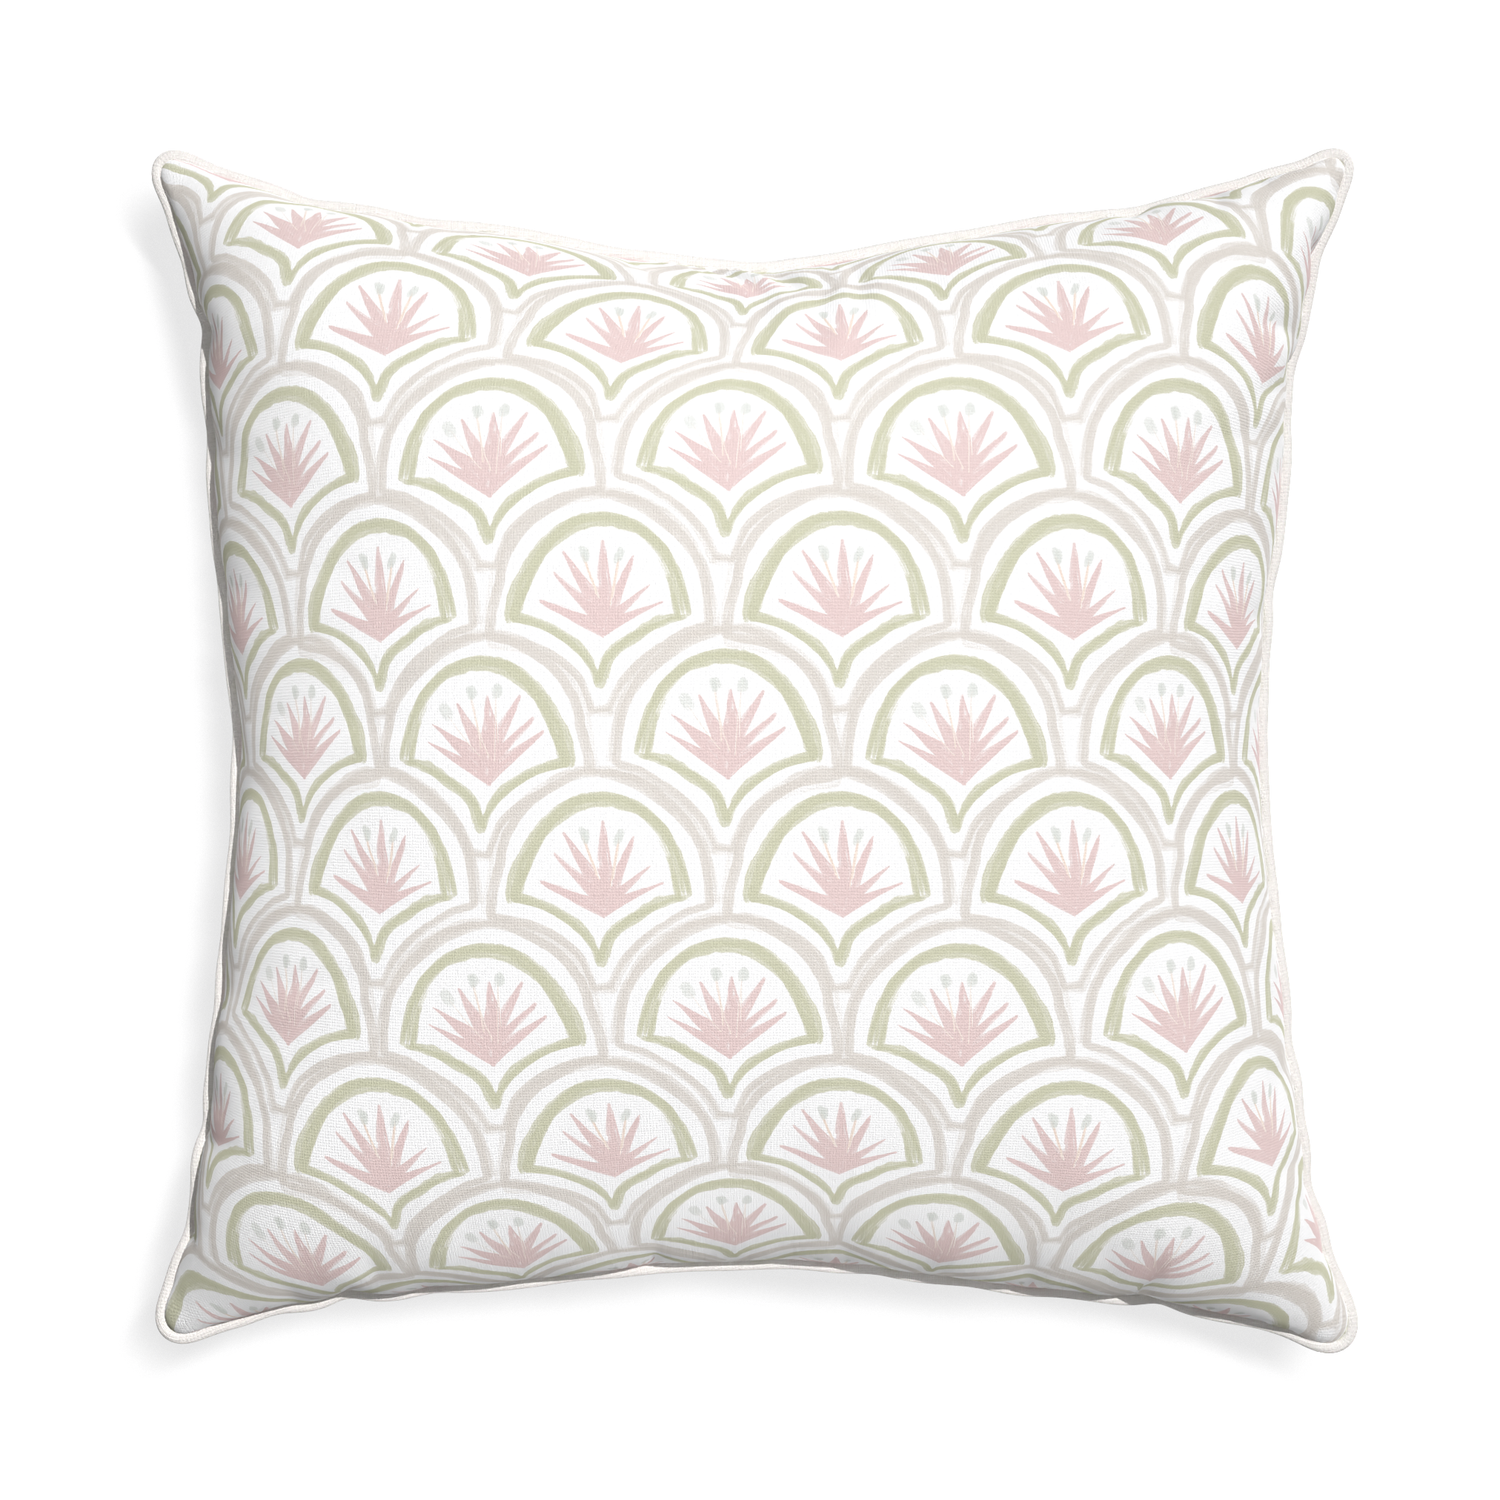 Euro-sham thatcher rose custom pillow with snow piping on white background